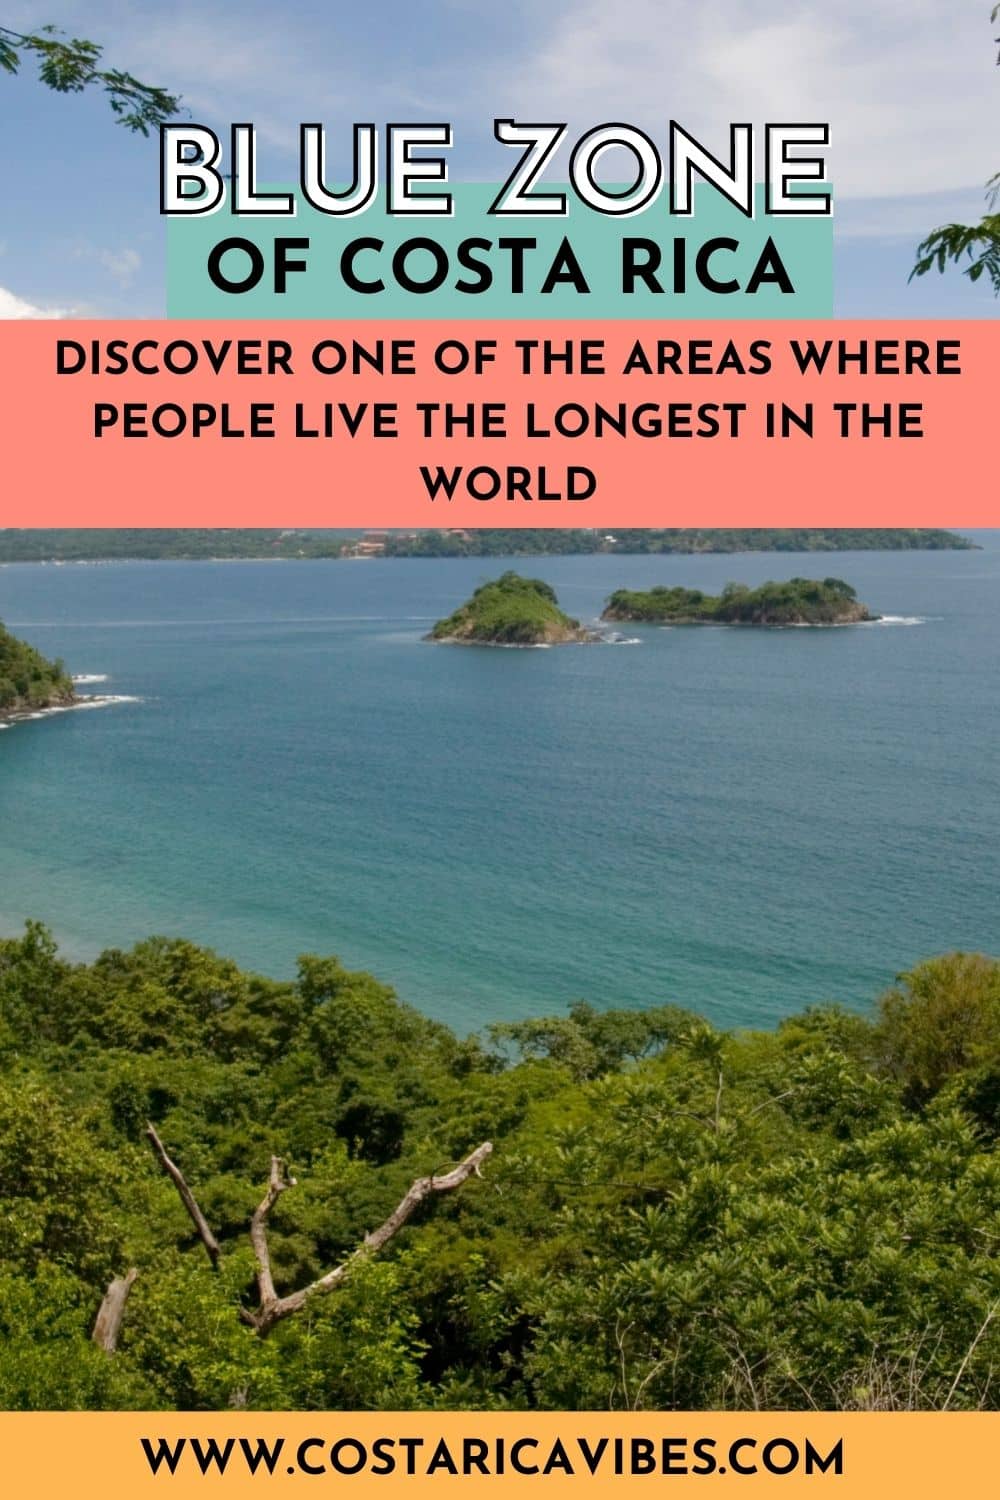 Costa Rica’s Blue Zone - The Place People Live to Over 100 Years Old